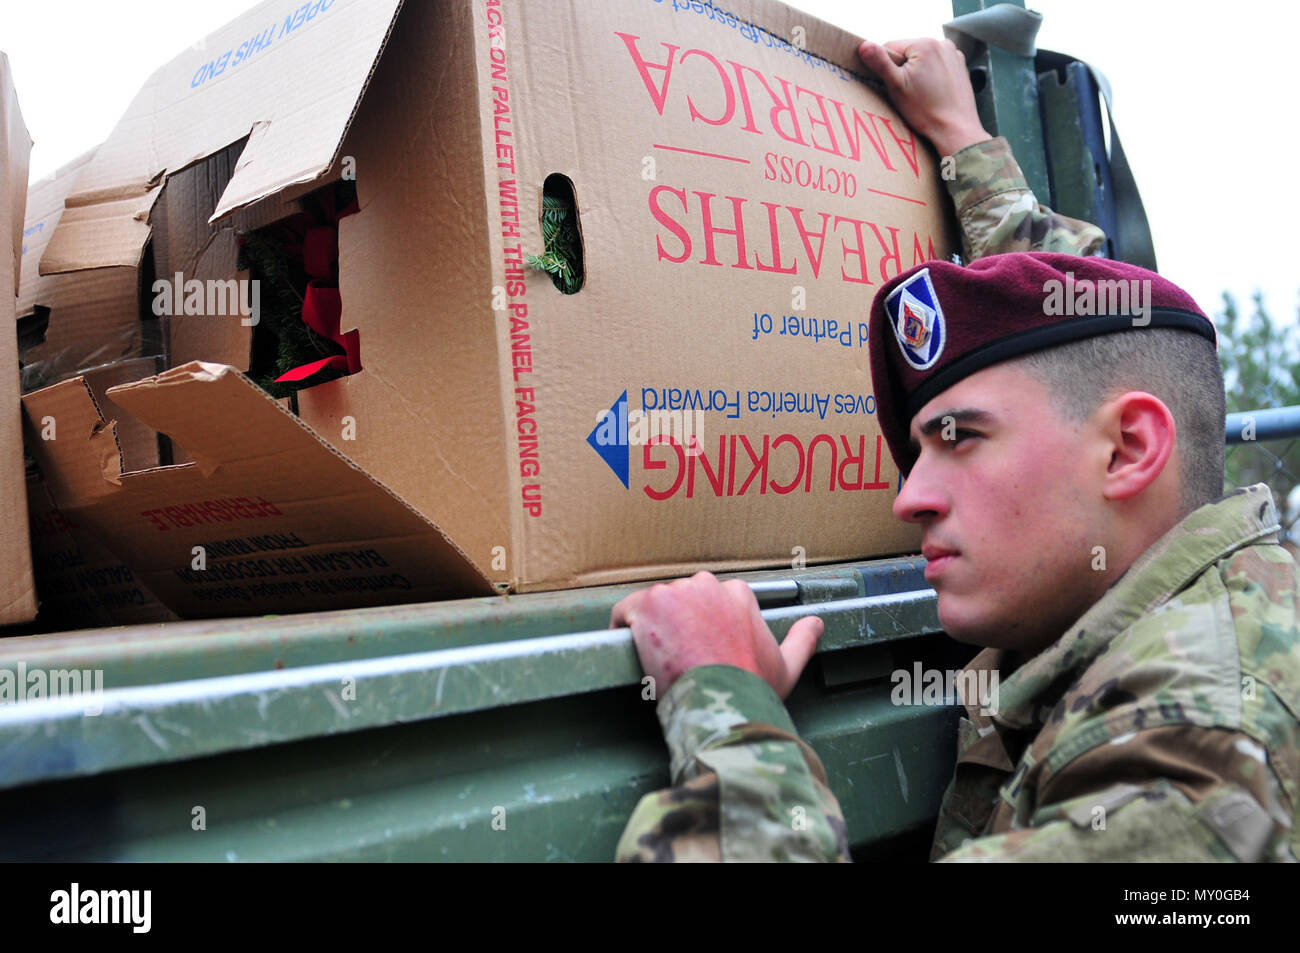 Pfc. Christopher Longoria, a Soldier assigned to XVIII Airborne Corps’ Headquarters and Headquarters Battalion, loads boxes of holiday wreaths onto the back of a military cargo truck, near Spring Lake, N.C. Dec. 17, 2016.  The wreaths were delivered to the Sand Hills State Veteran’s Cemetery nearby as part of an event called Wreaths Across America.  According to Senate Resolution 726 of the 110th U.S. Congress, the annual event “recognizes the sacrifices our veterans, service members and their families have made, and continue to make, for our great Nation.” (U.S. Army photo by Pfc. Hubert D. D Stock Photo